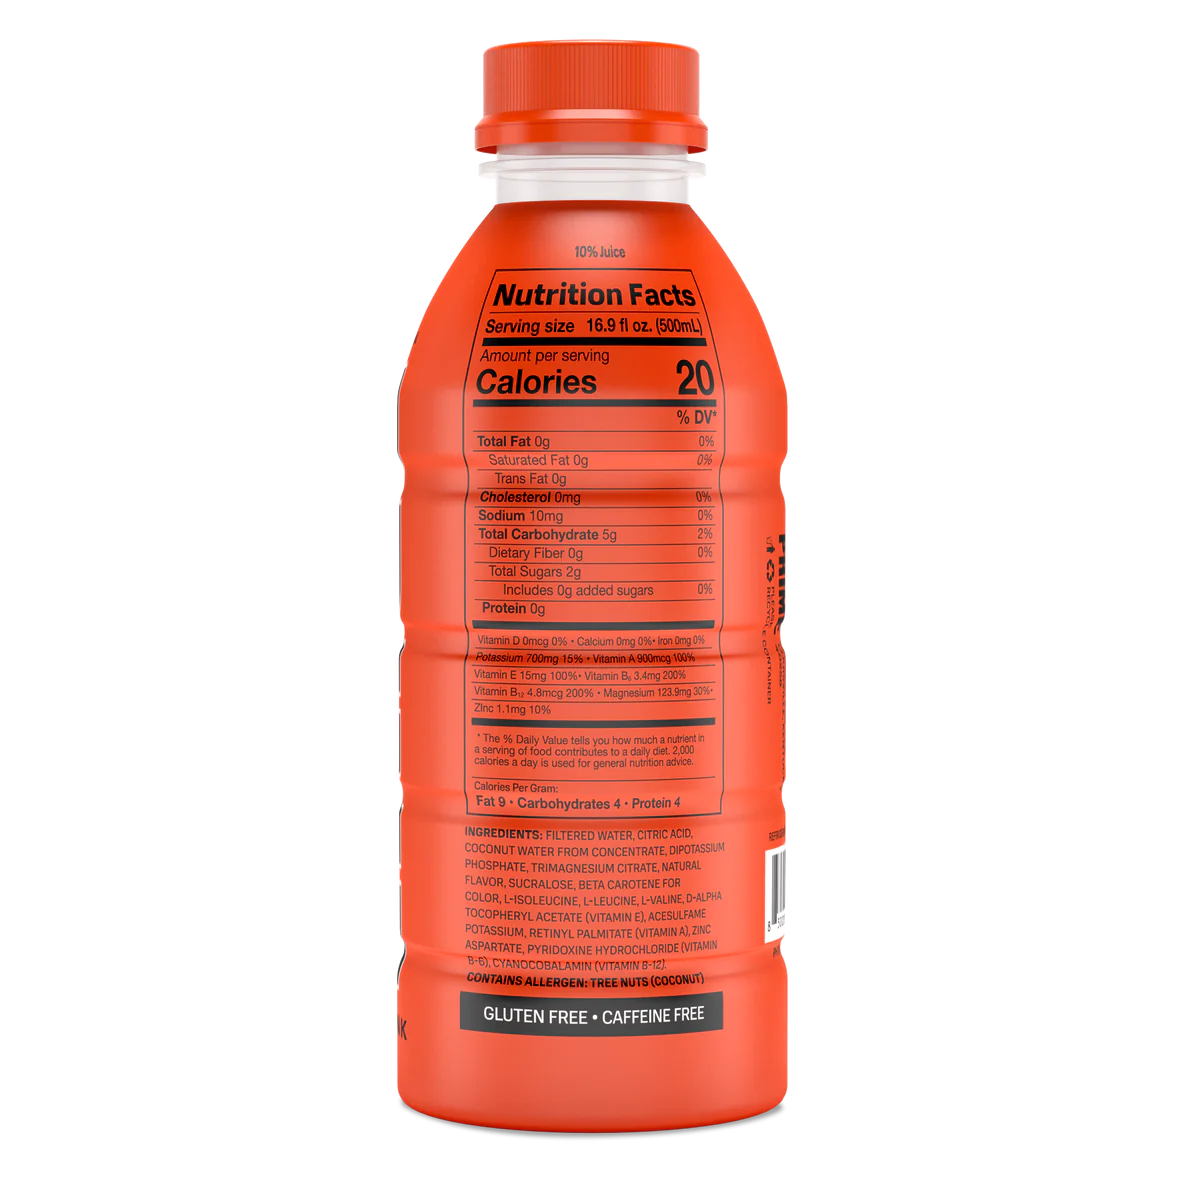 Prime Hydration Drink - Tropical Punch 500ml